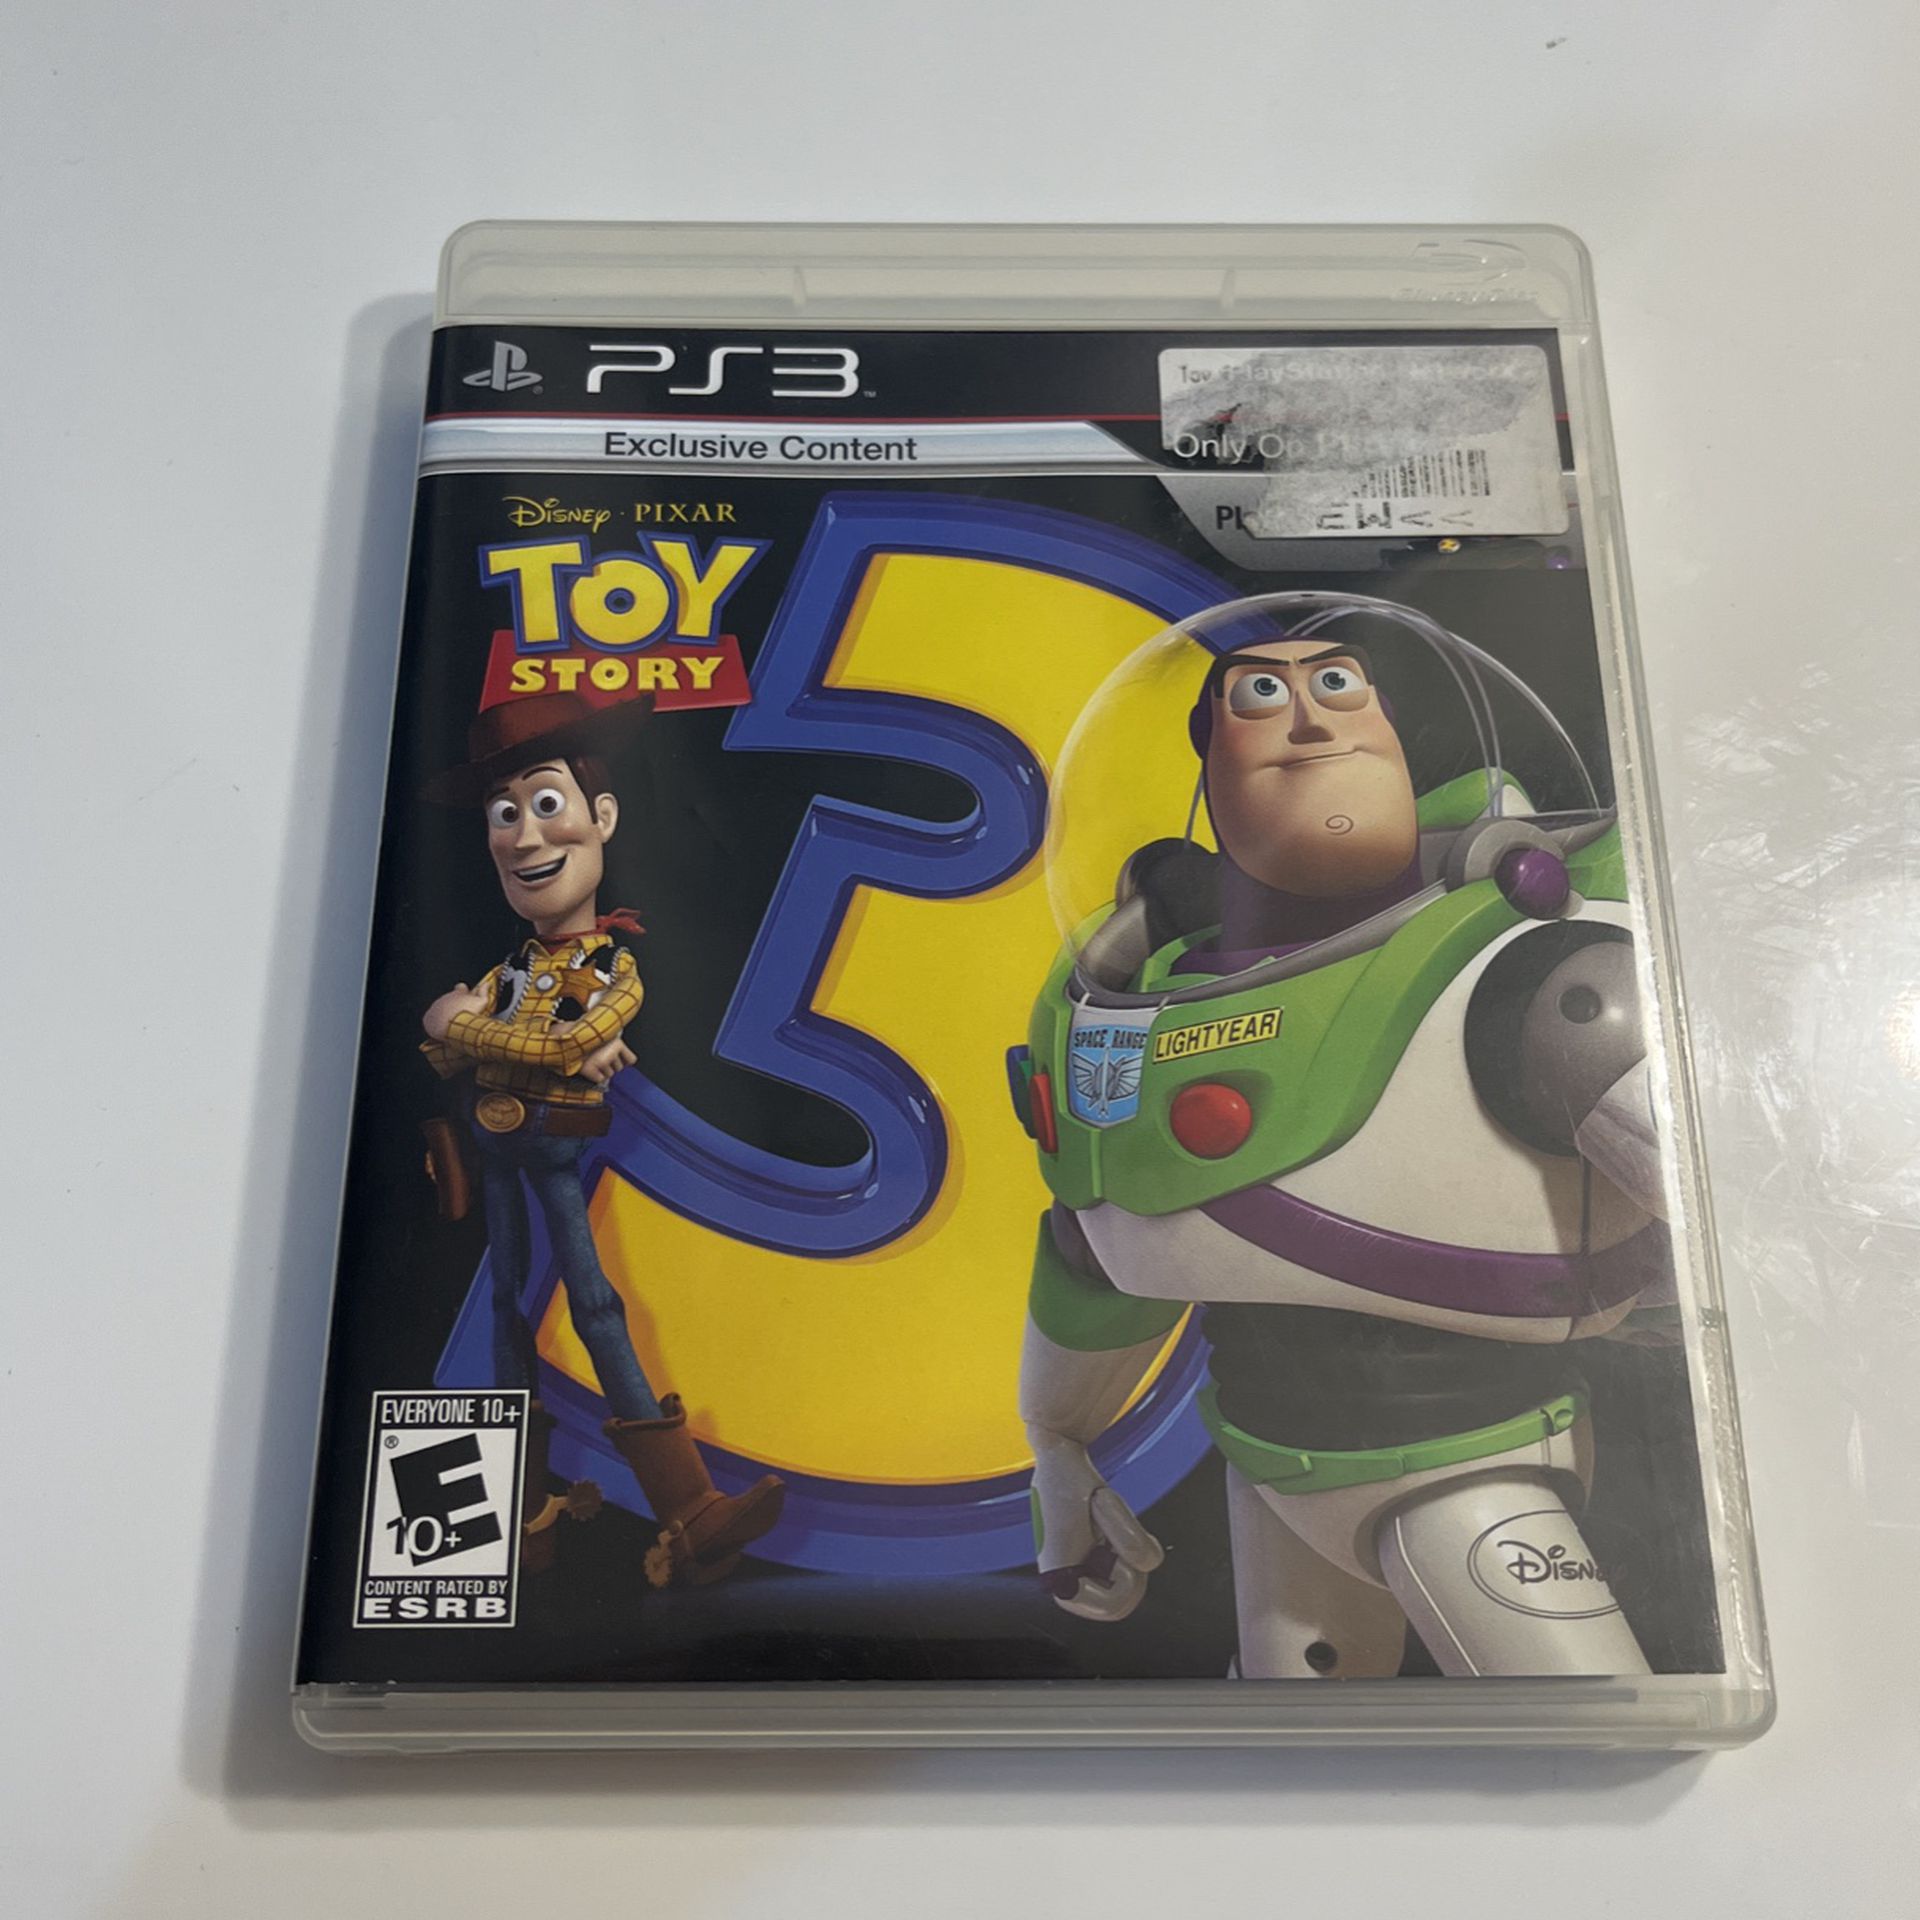 Toy Story 3 Ps3 Complete